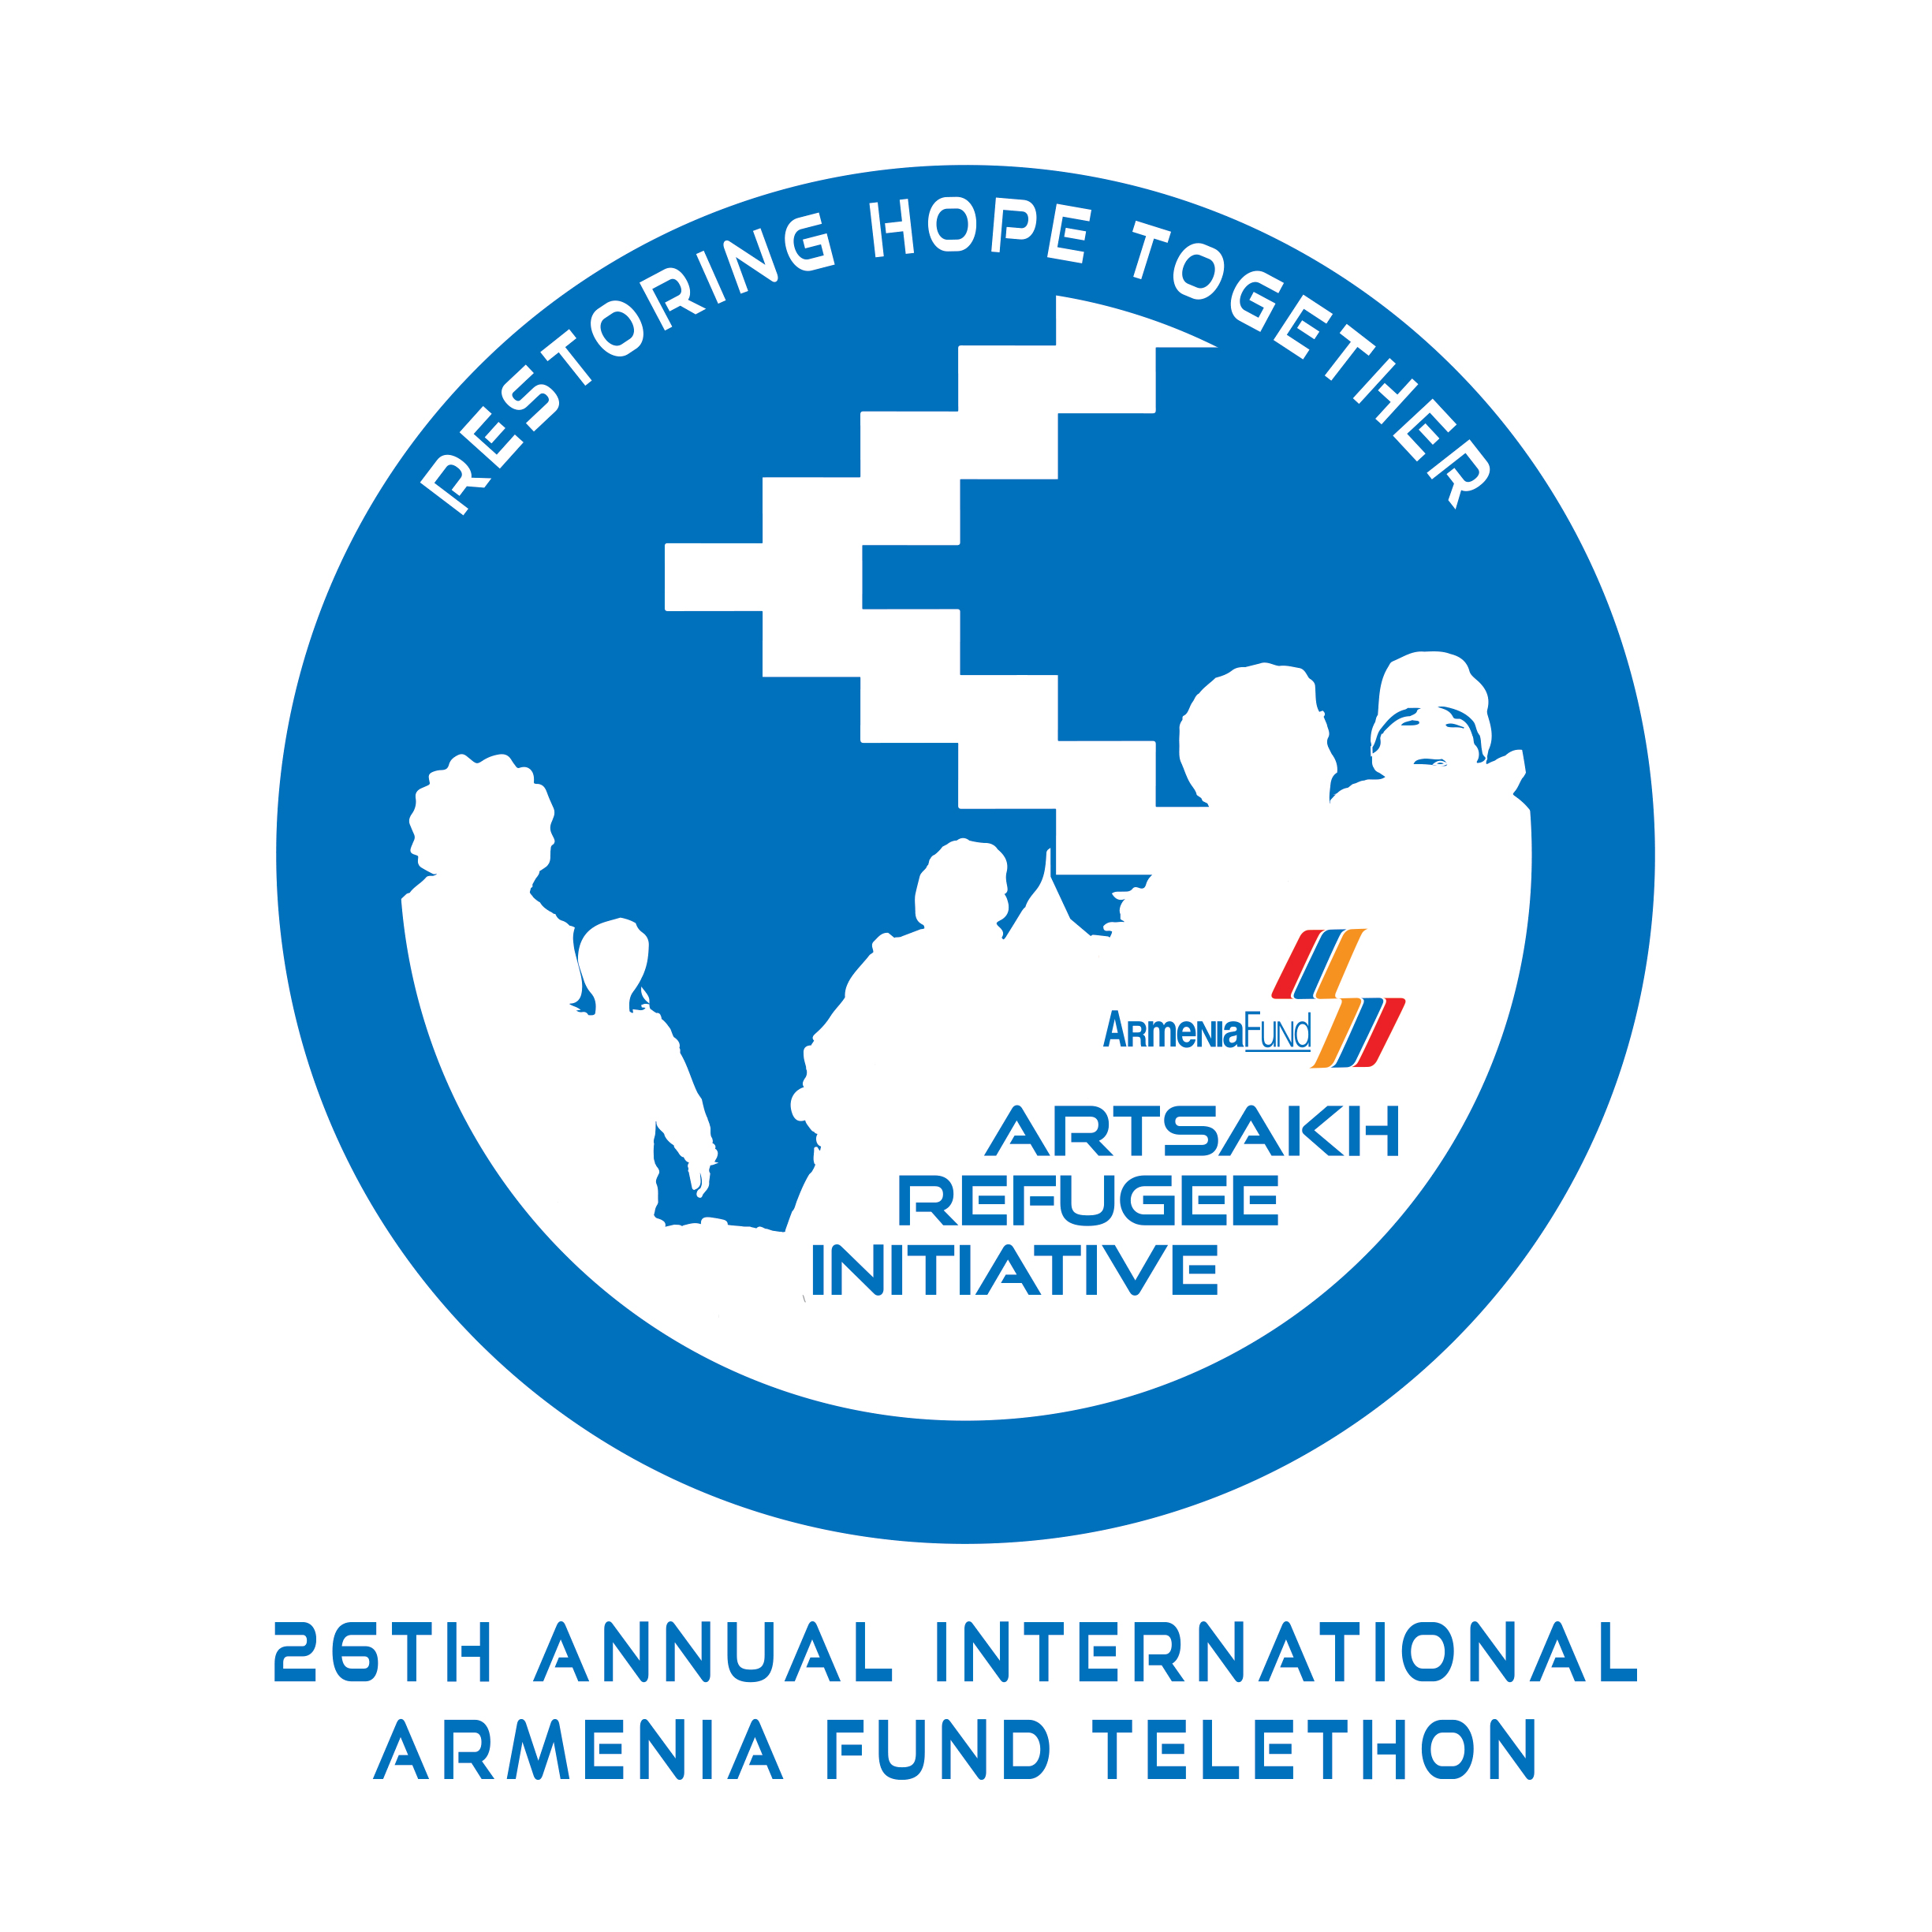 Fundraising Event Continues to Bridge Diaspora With Armenia In Its 26th Year